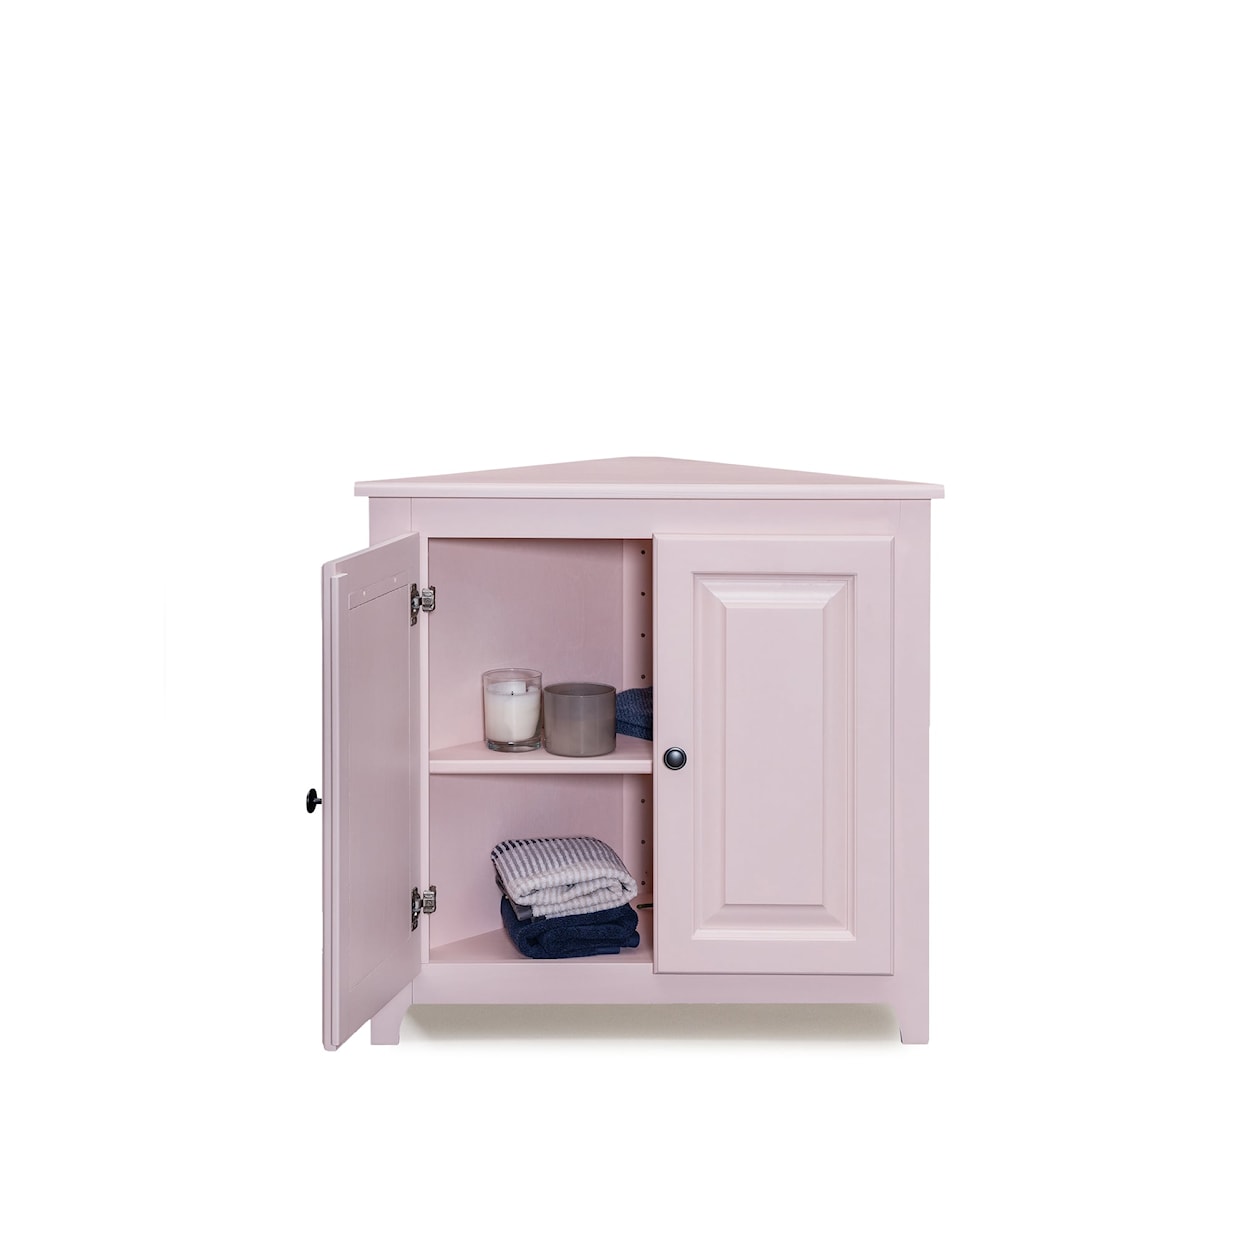 Archbold Furniture Pantries and Cabinets Corner Shelf with Doors